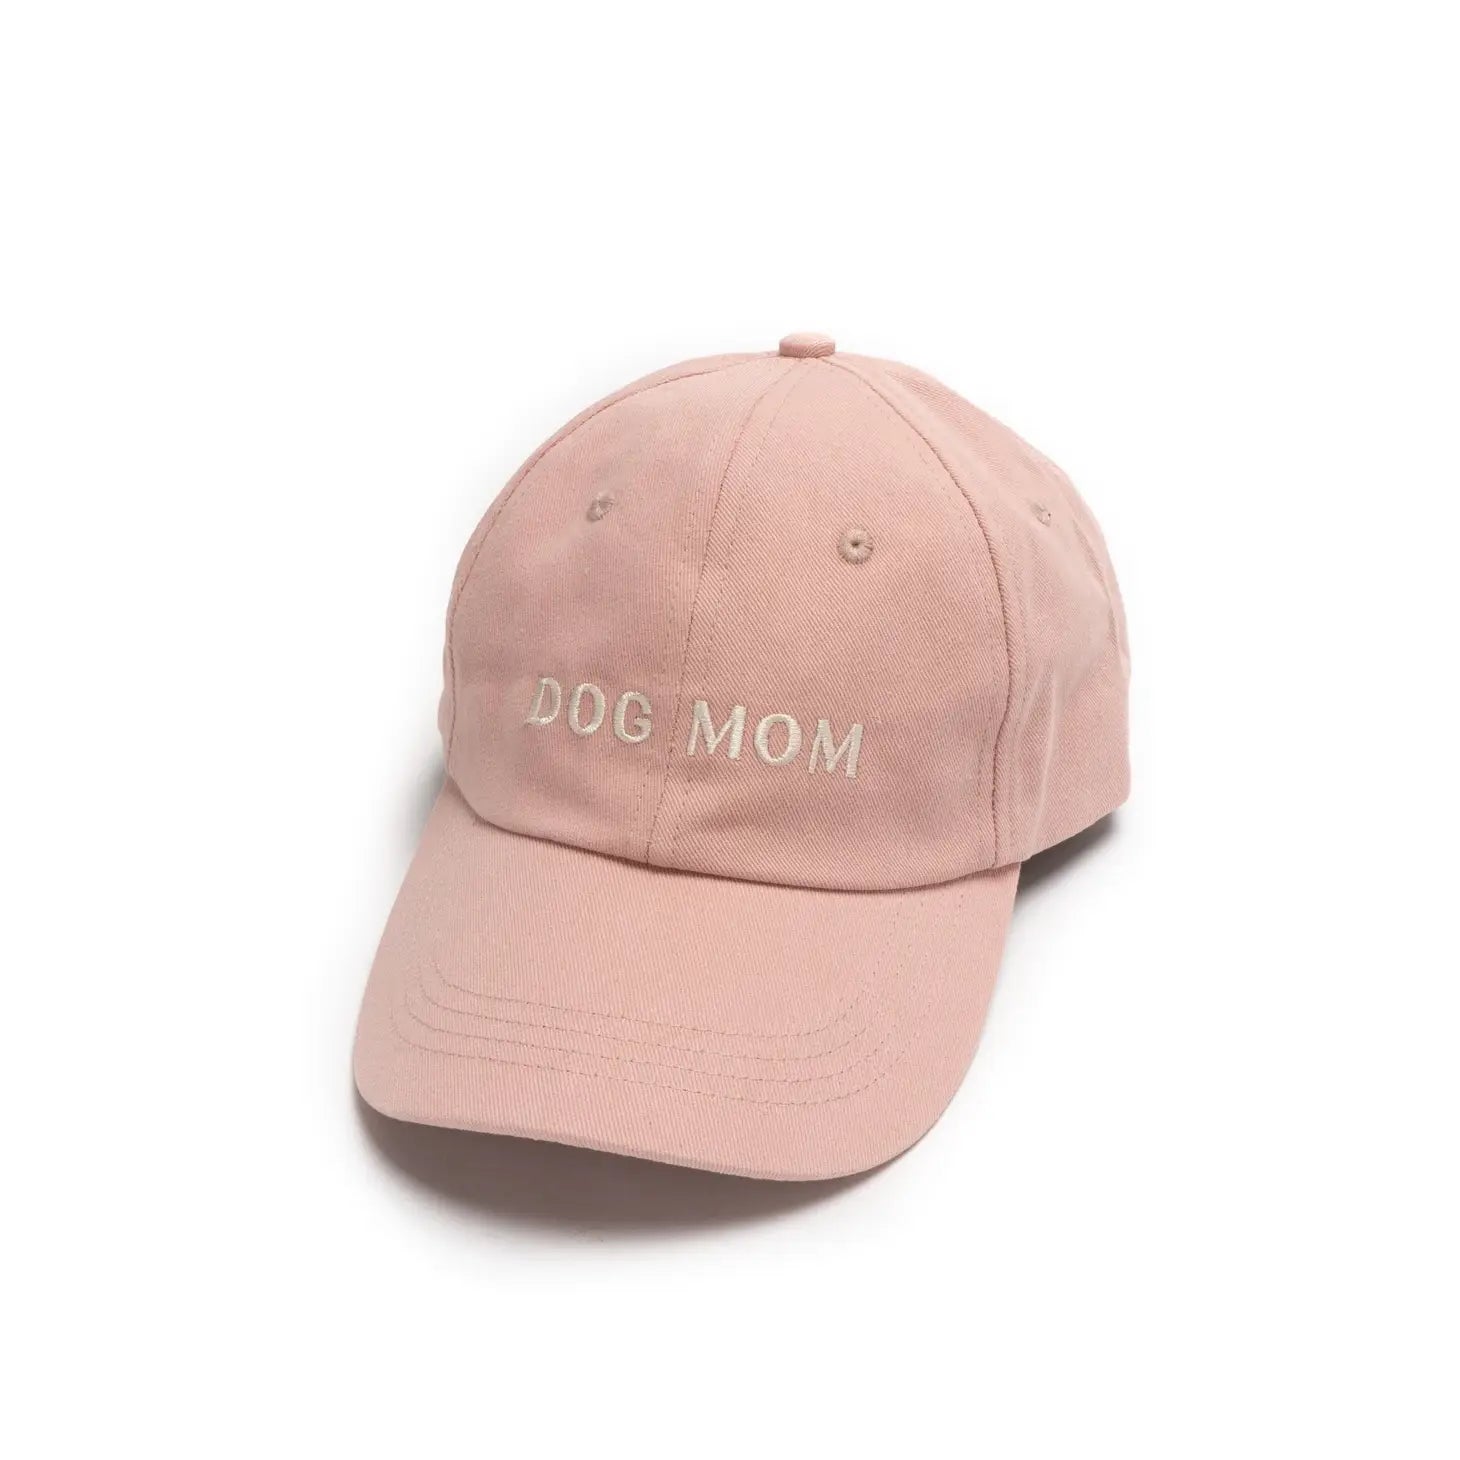 Lucy & Co. - Dog Mom Hat